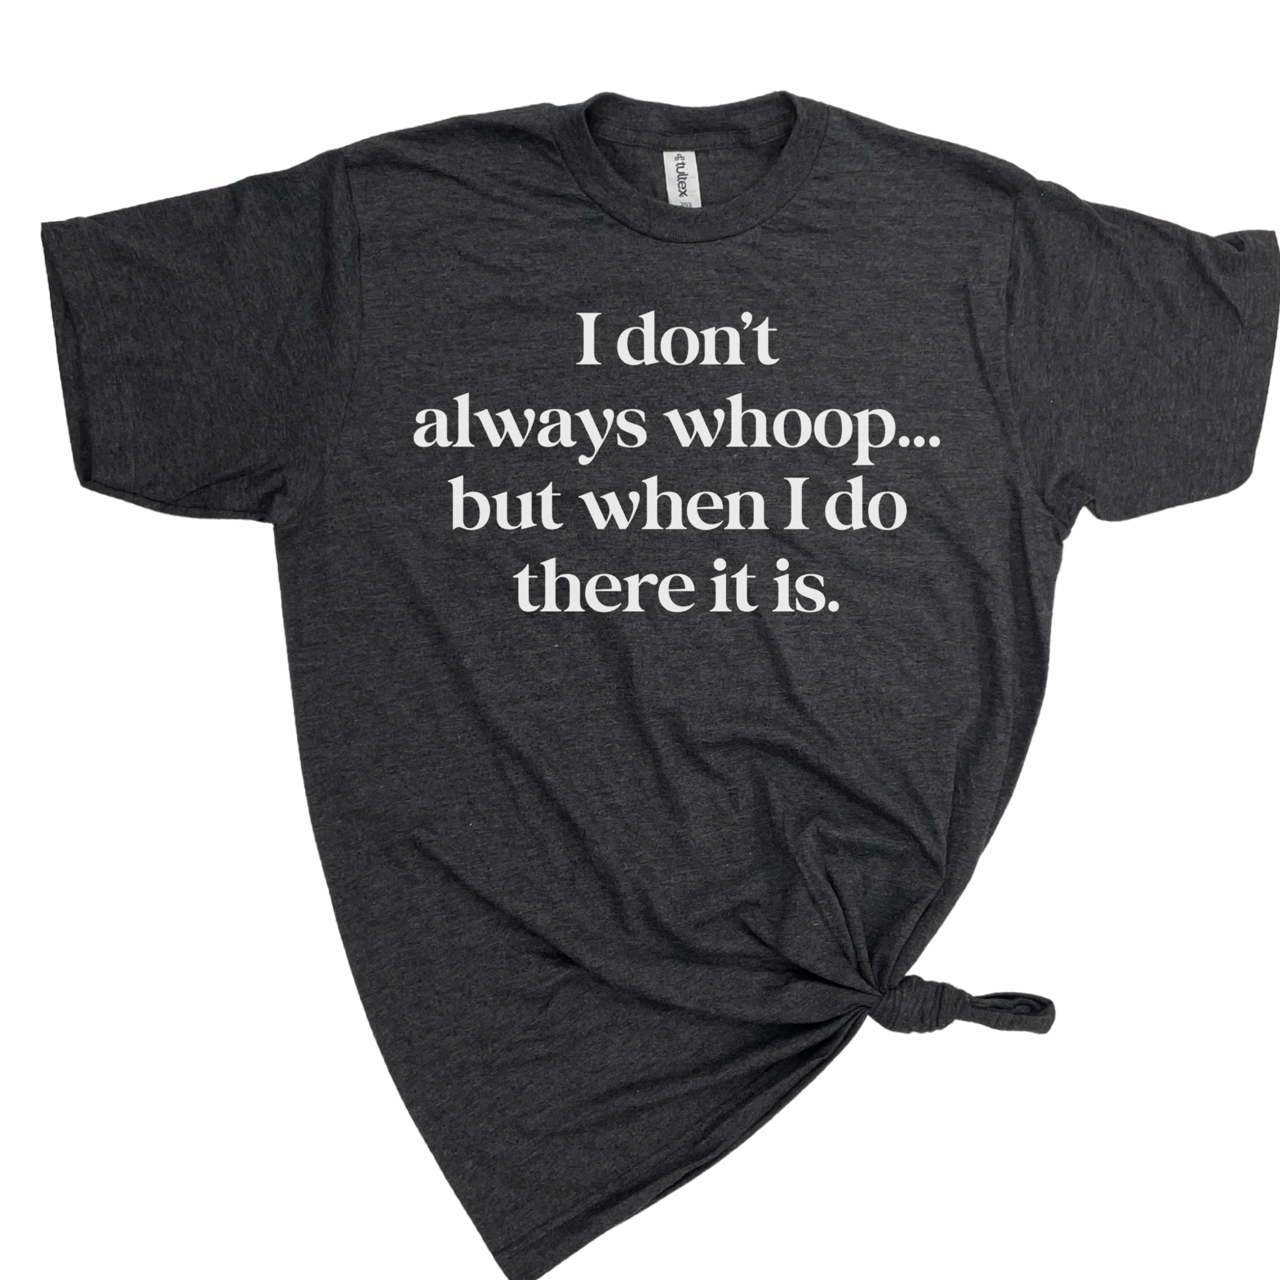 I DON'T ALWAYS WHOOP BUT WHEN I DO THERE IT IS T-SHIRT